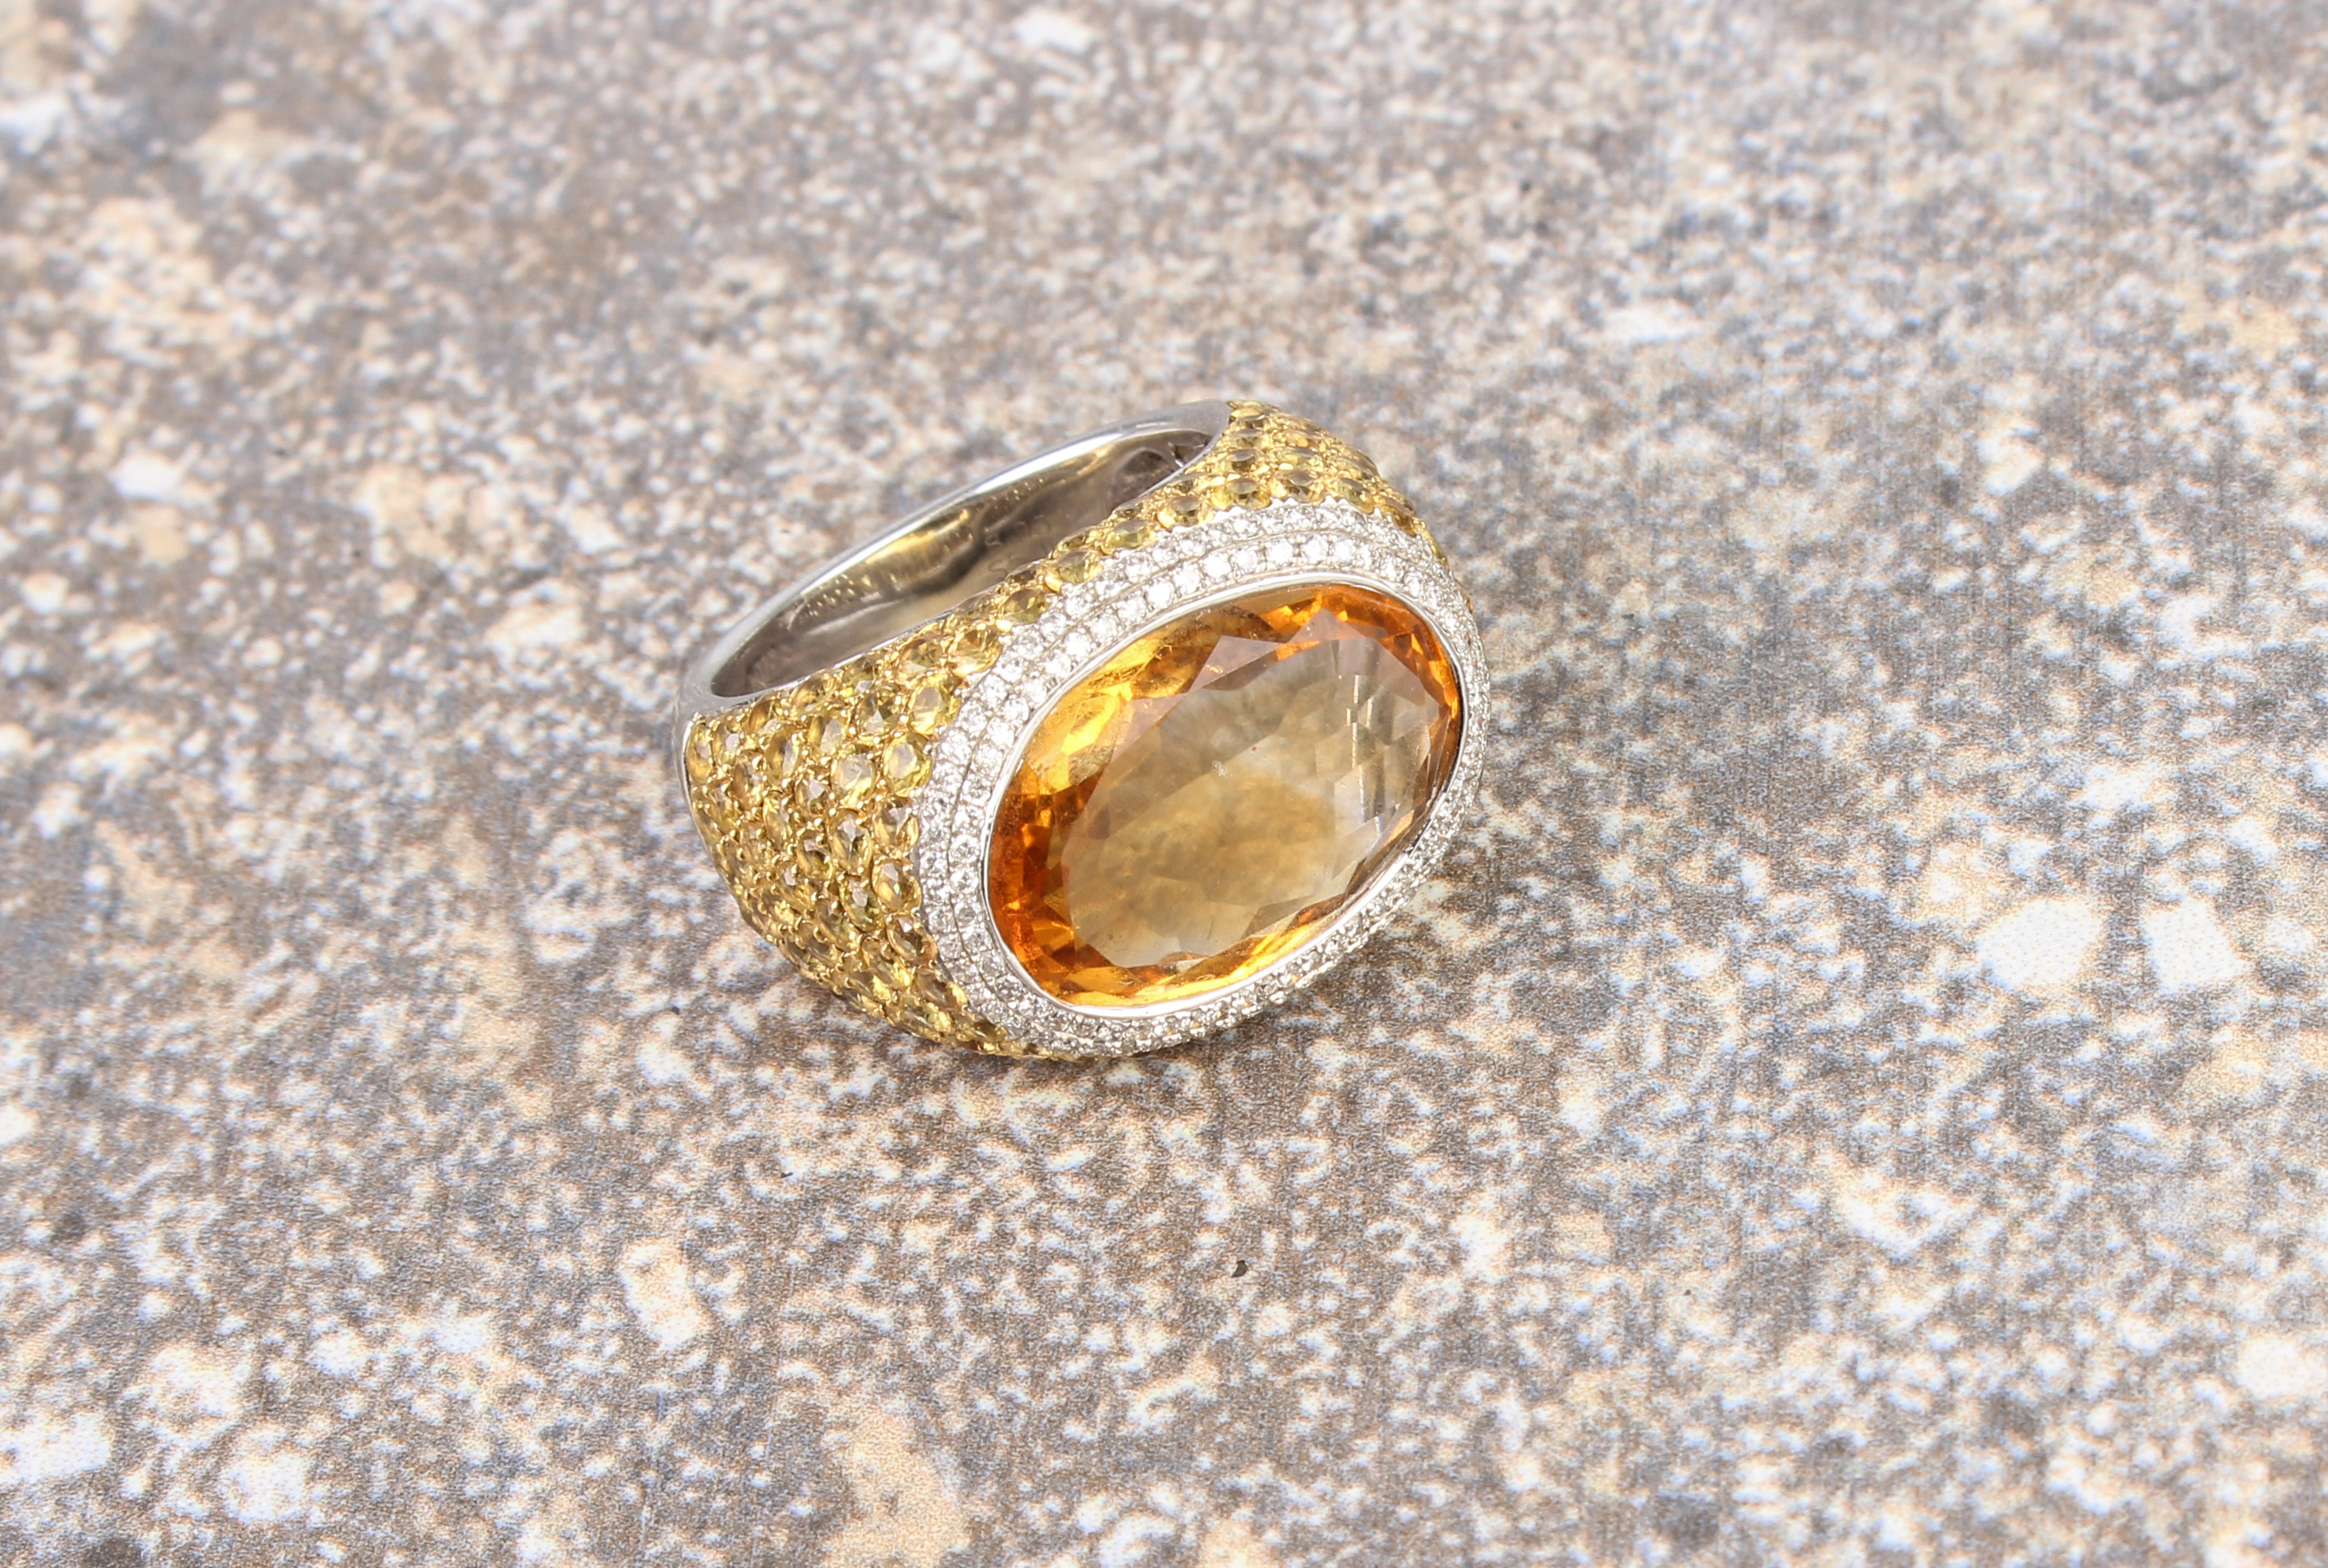 An impressive 18ct gold, citrine, yellow sapphire and diamond ring - marked 'K18 750', the 8.05ct